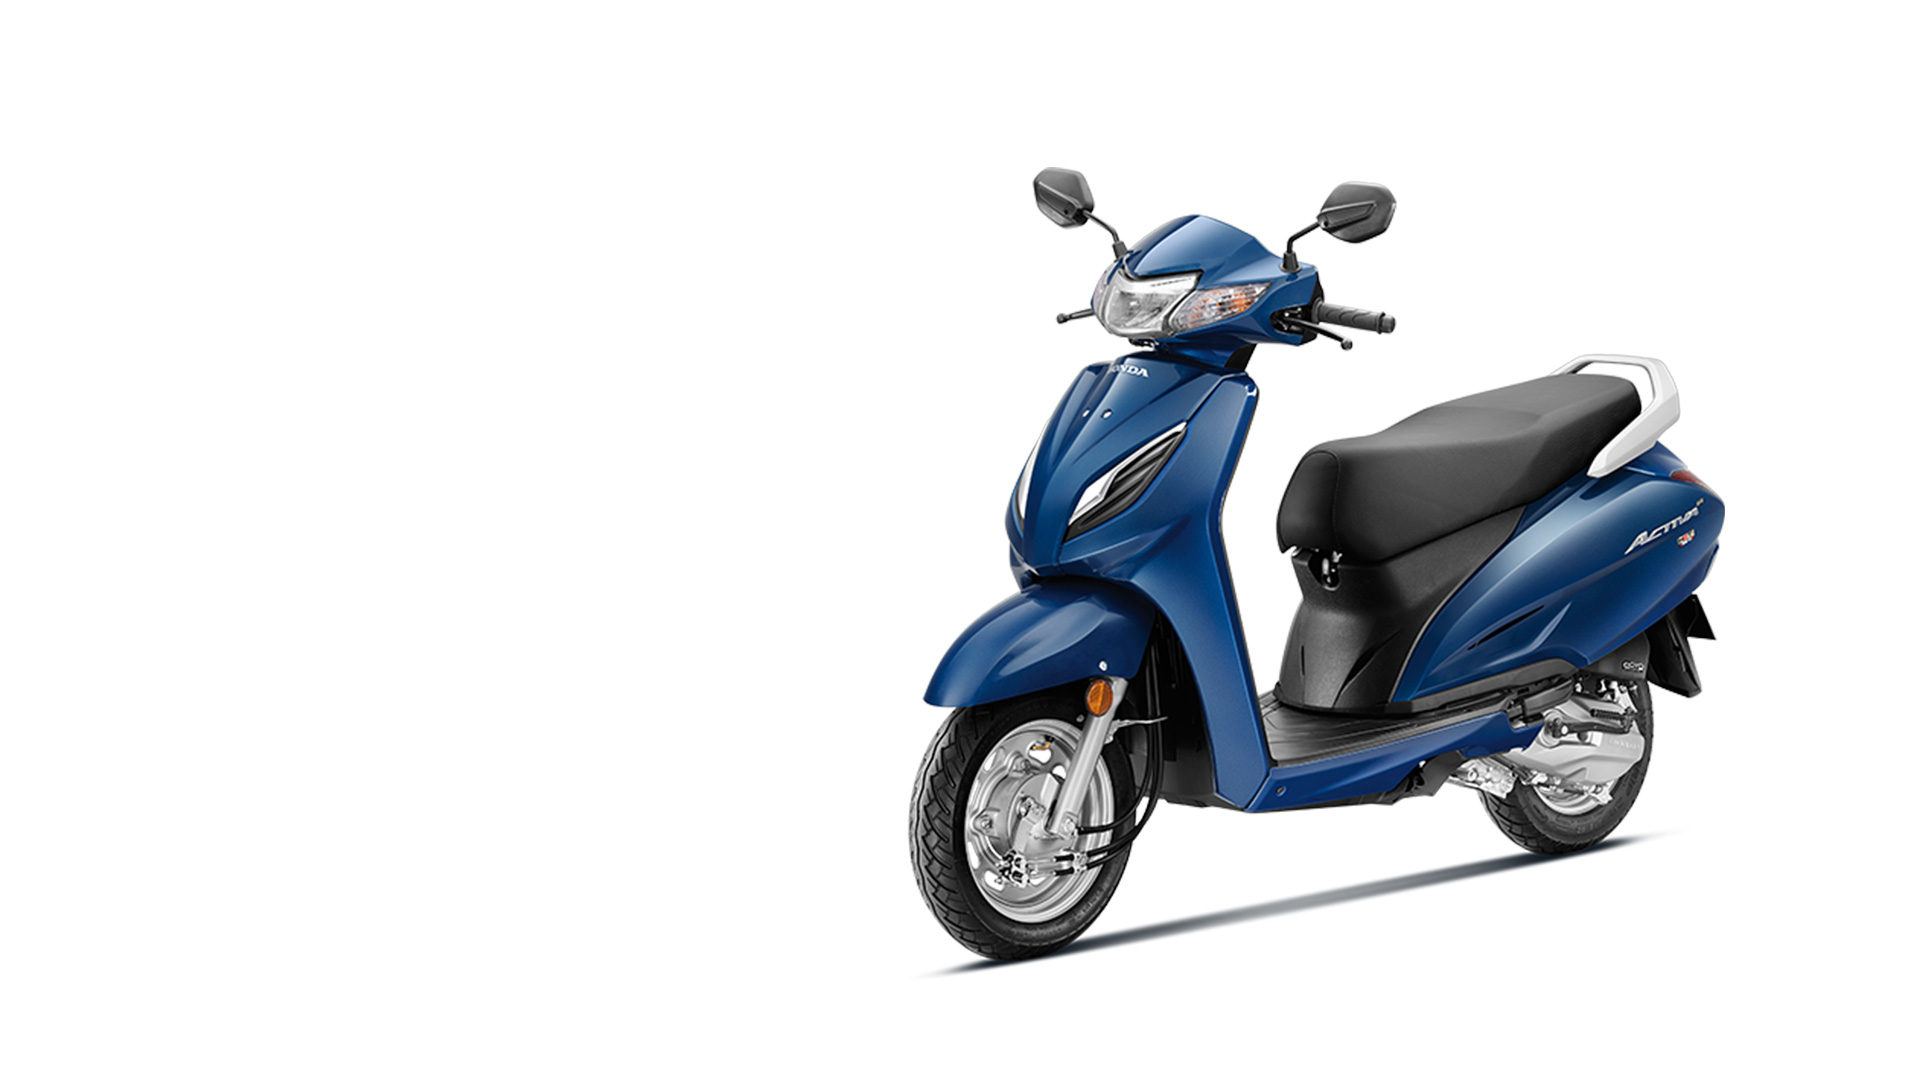 Honda Activa 6g 2020 Price Mileage Reviews Specification Gallery Overdrive